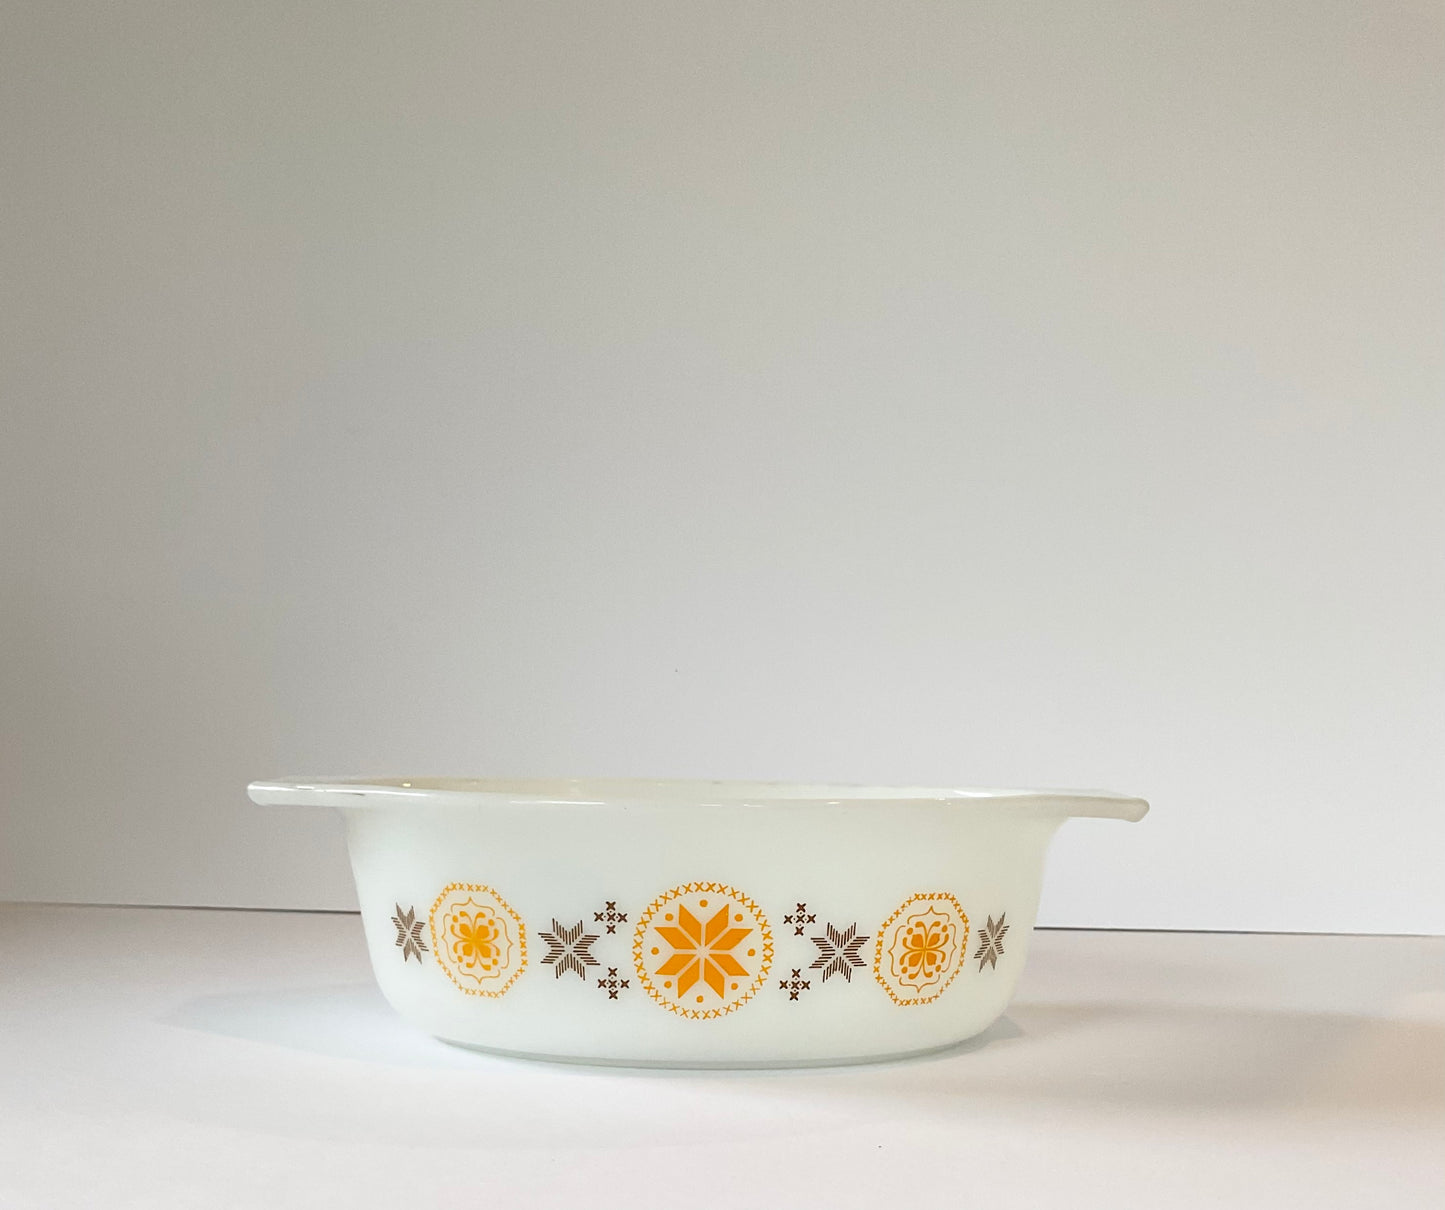 Vintage Pyrex 043 Small Casserole Dish, Town and Country Orange and Brown